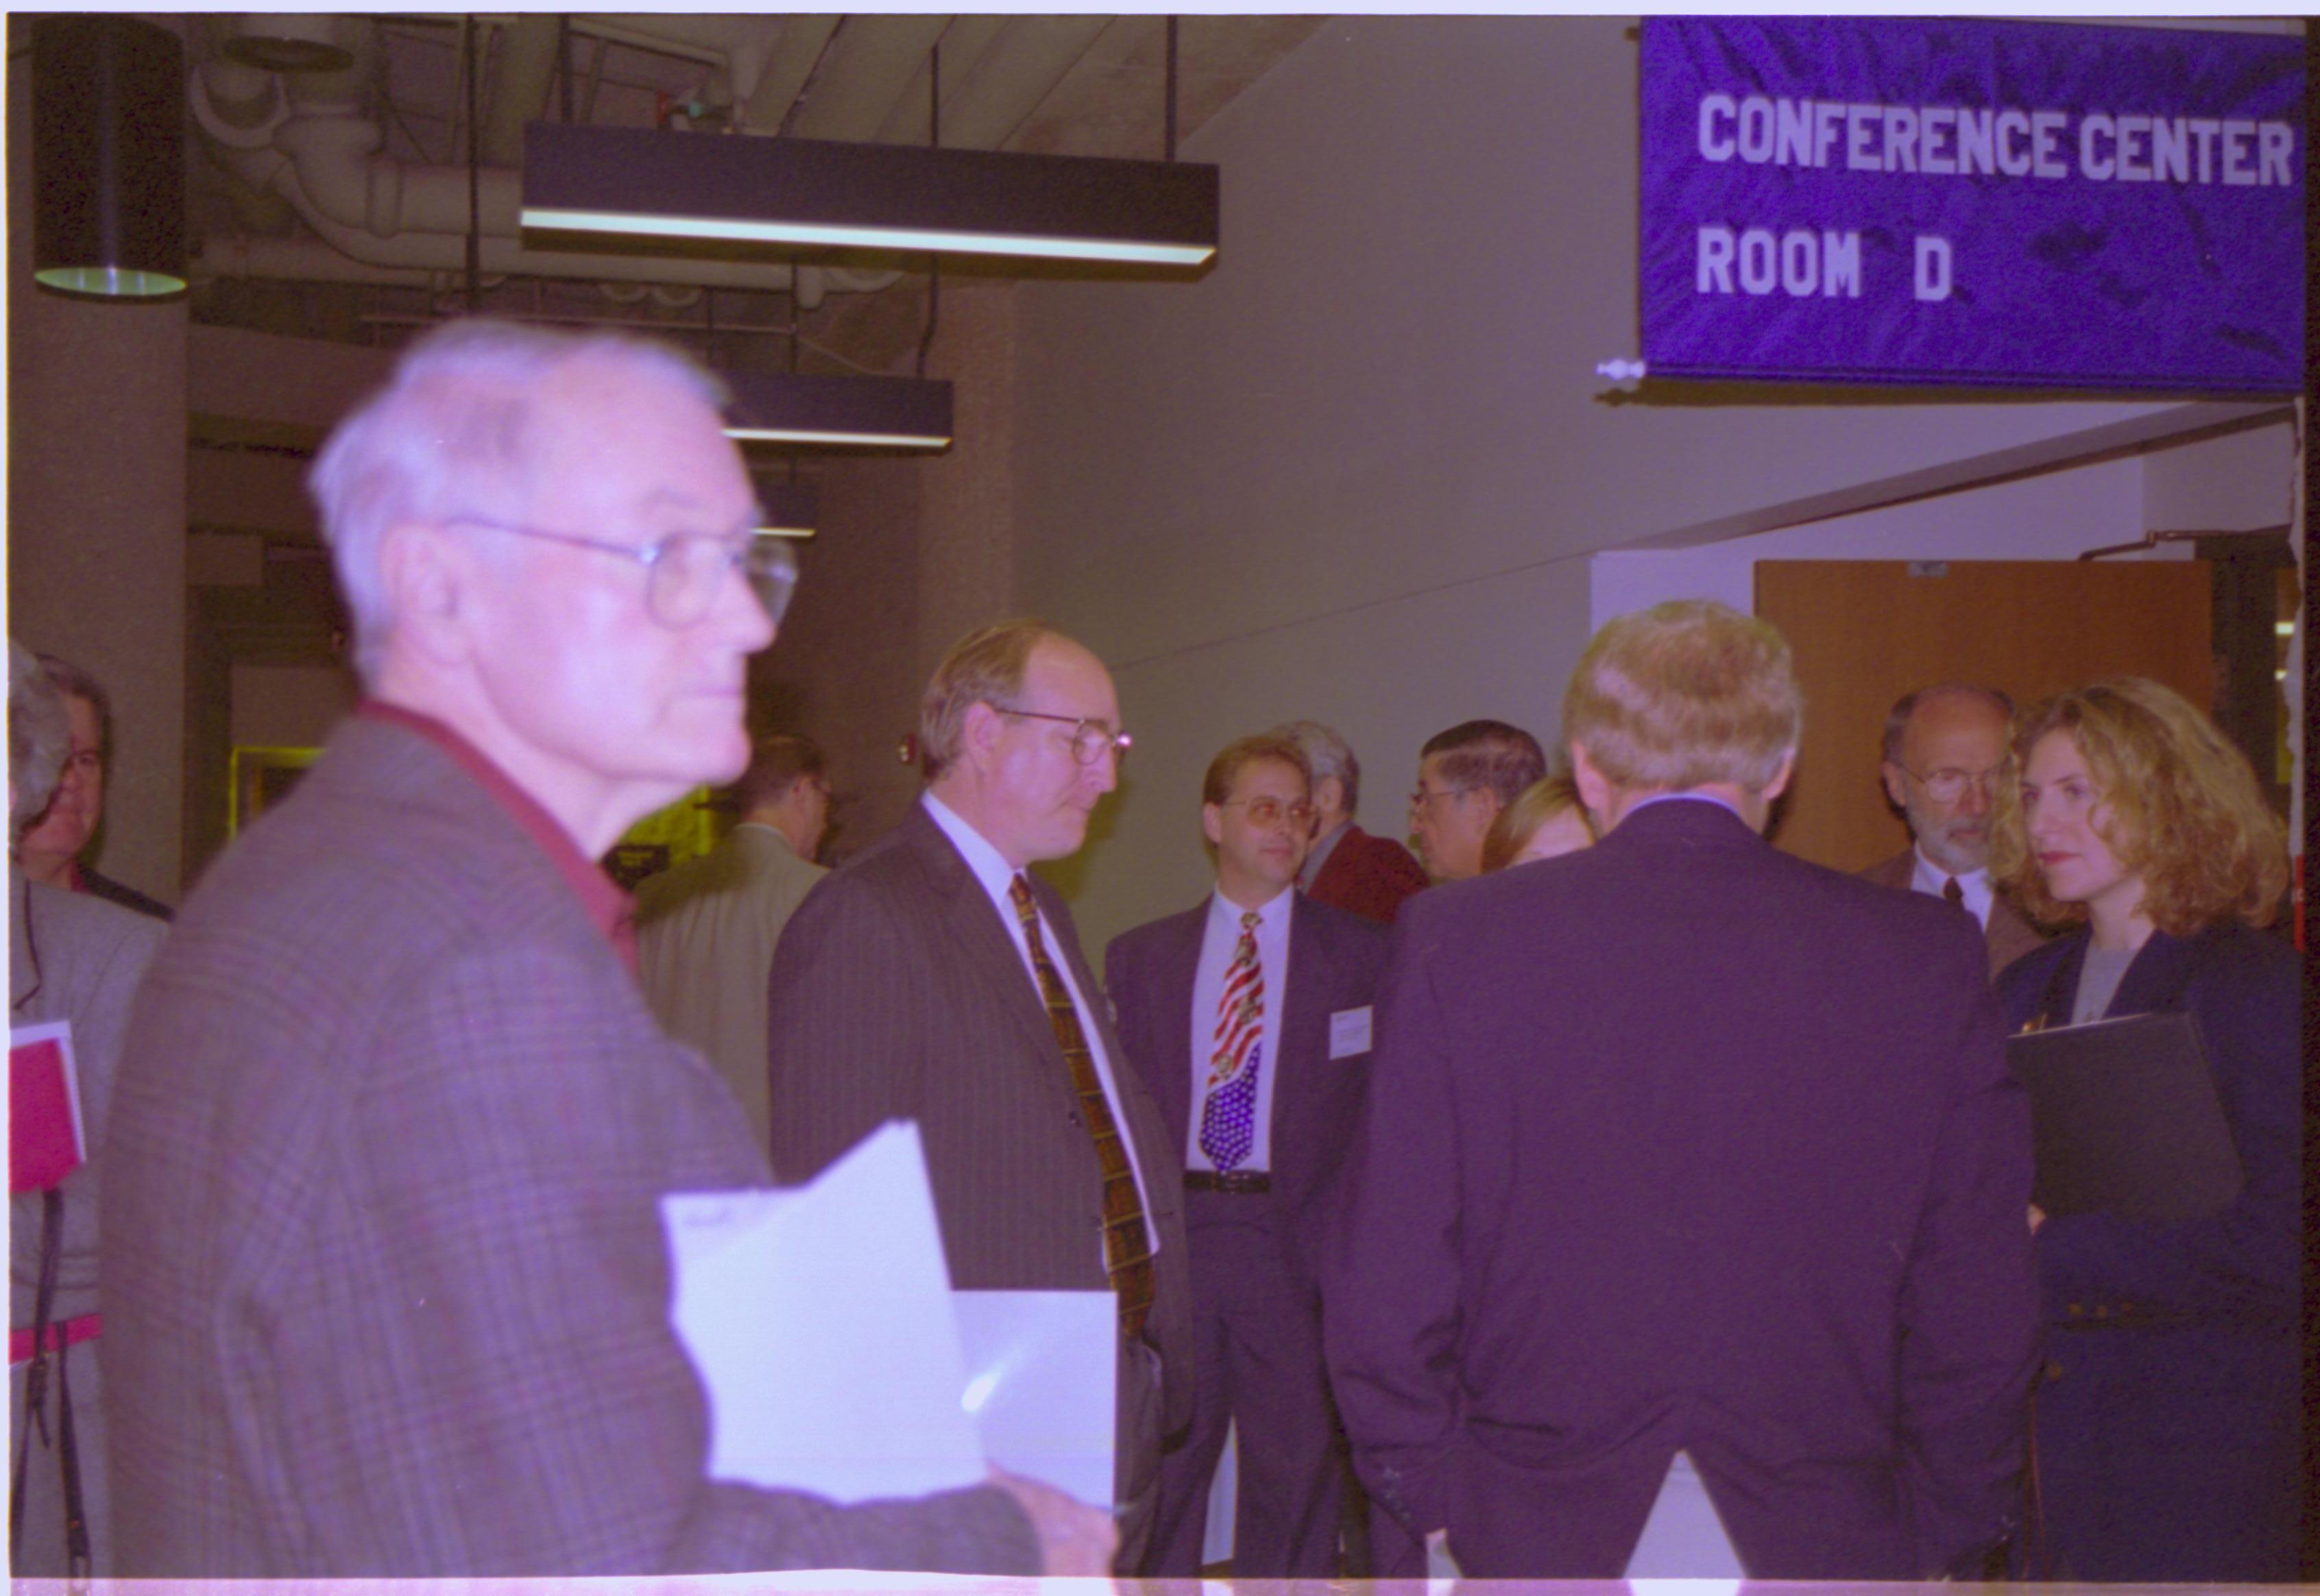 Group standing outside door way talking. 3-1997 Colloq (color); 27 Colloquium, 1997